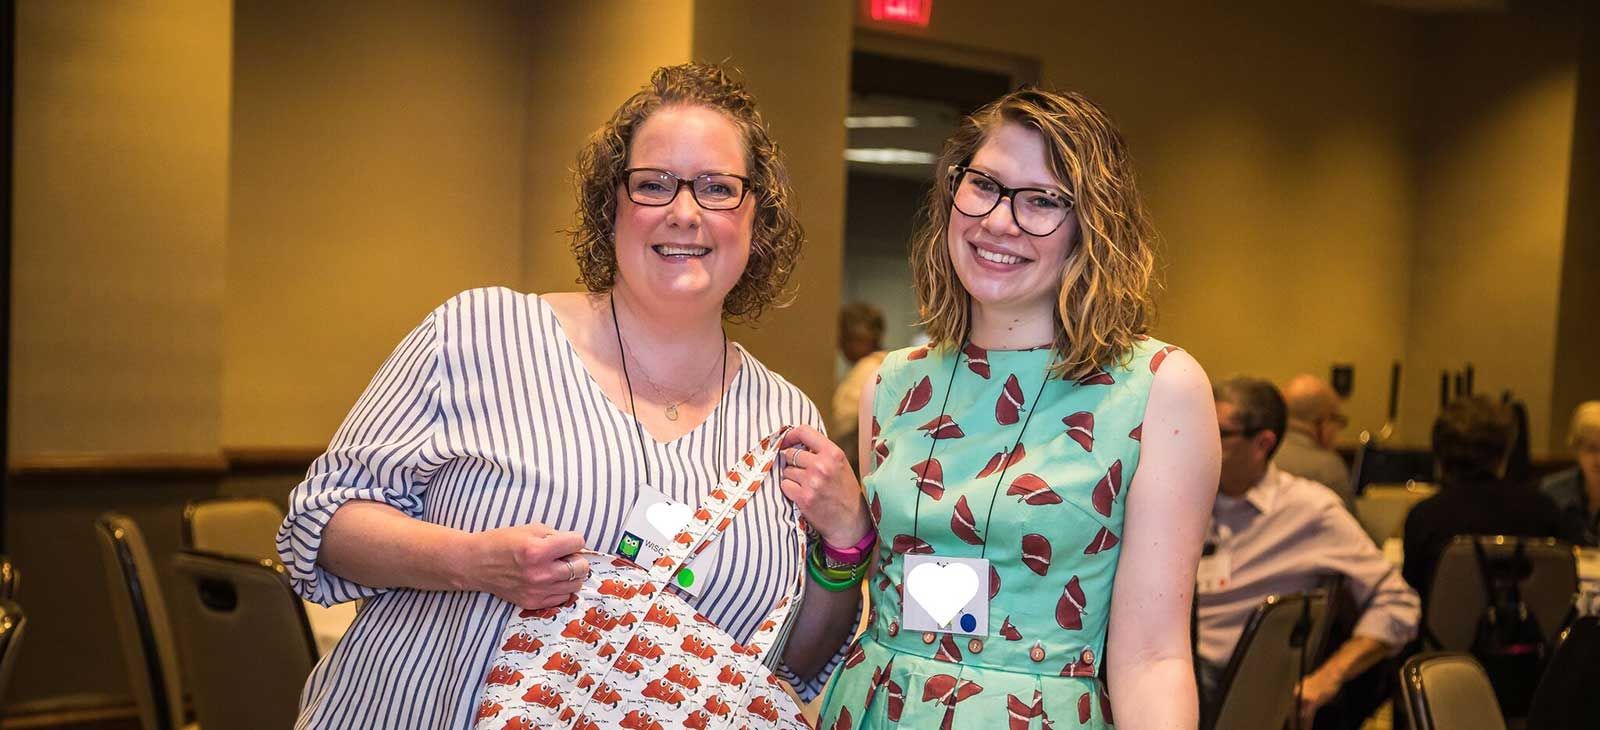 Two women look at the camera smiling. One is holding a cloth bag with cartoon livers all over it. The other is wearing a dress with cartoon livers all over it.